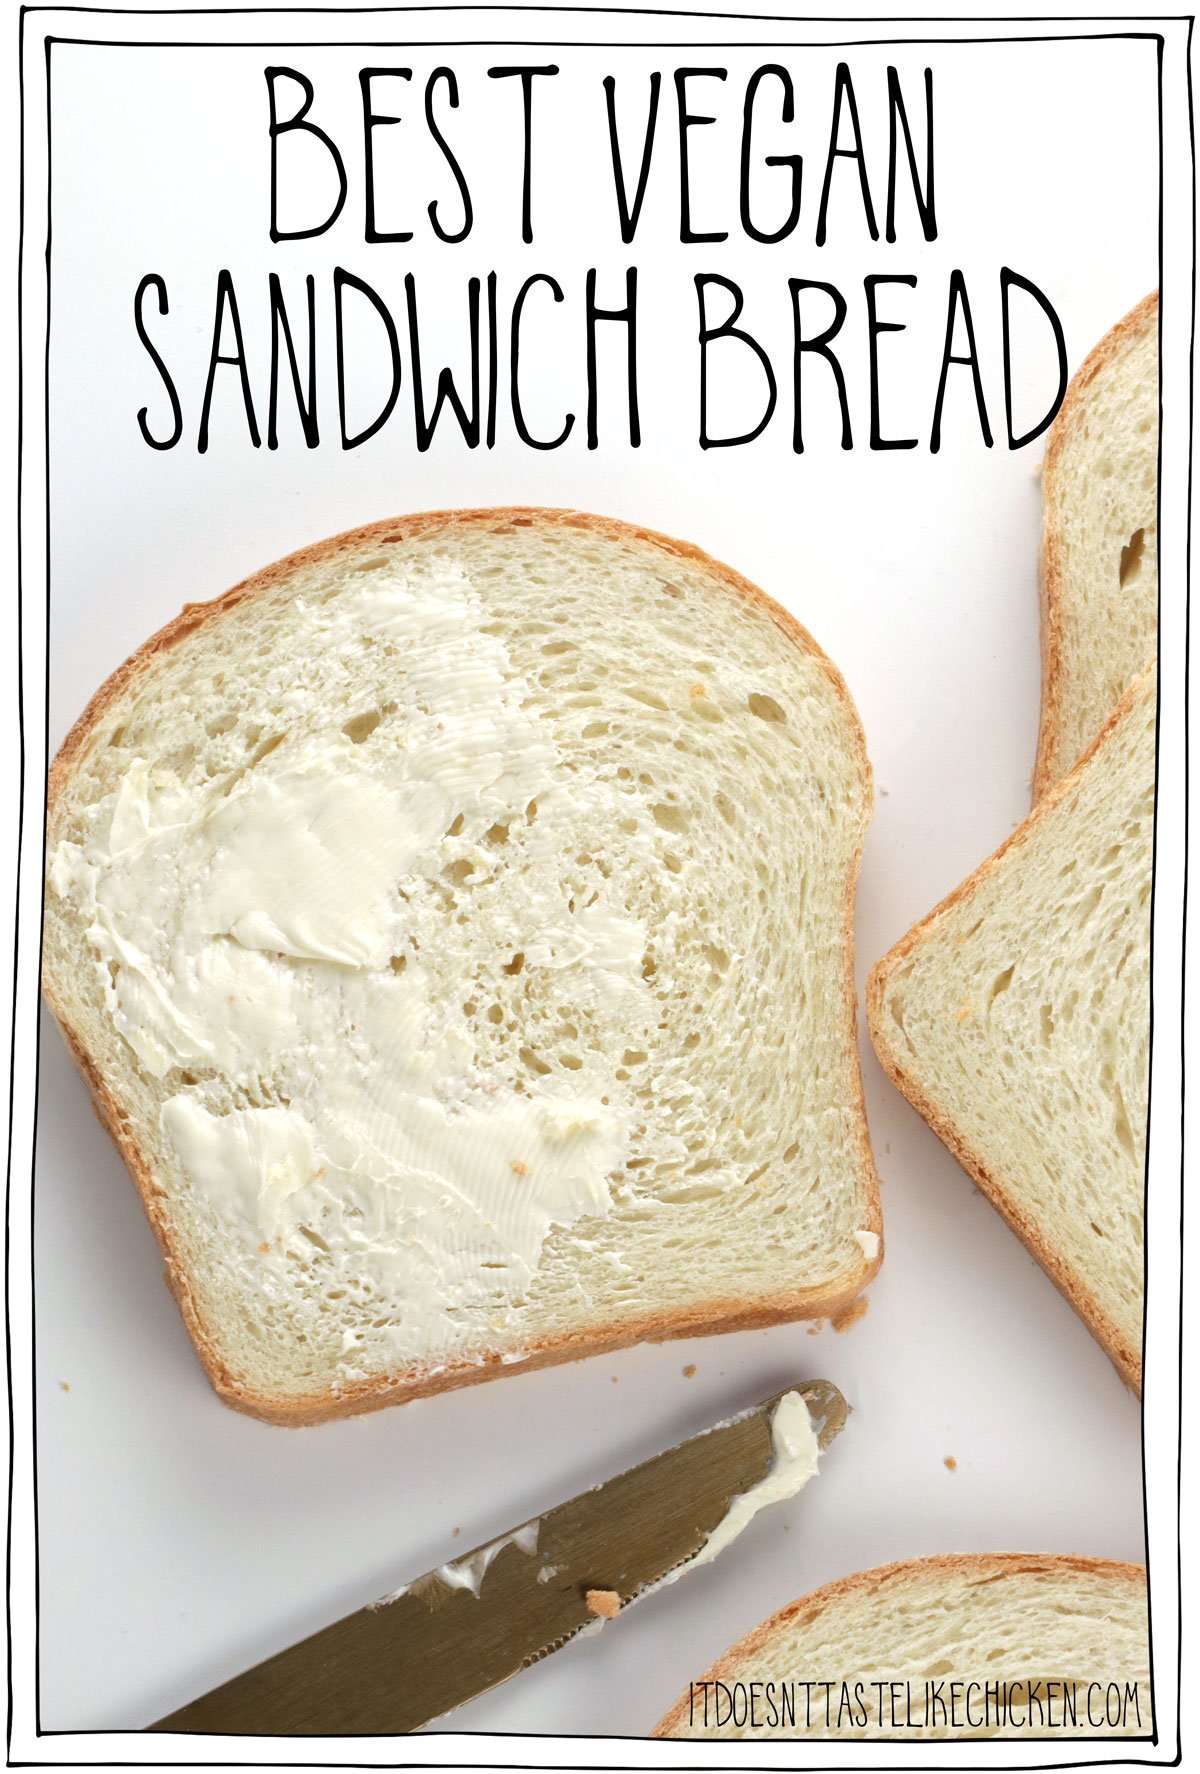 Perfectly fluffy, tender, and strong enough to hold your sandwich toppings. Learn how to make the best vegan sandwich bread from scratch with just 7 simple ingredients that you likely already have in your pantry. I include step-by-step photos to guide you. #itdeosnttastelikechicken #veganrecipes #bread